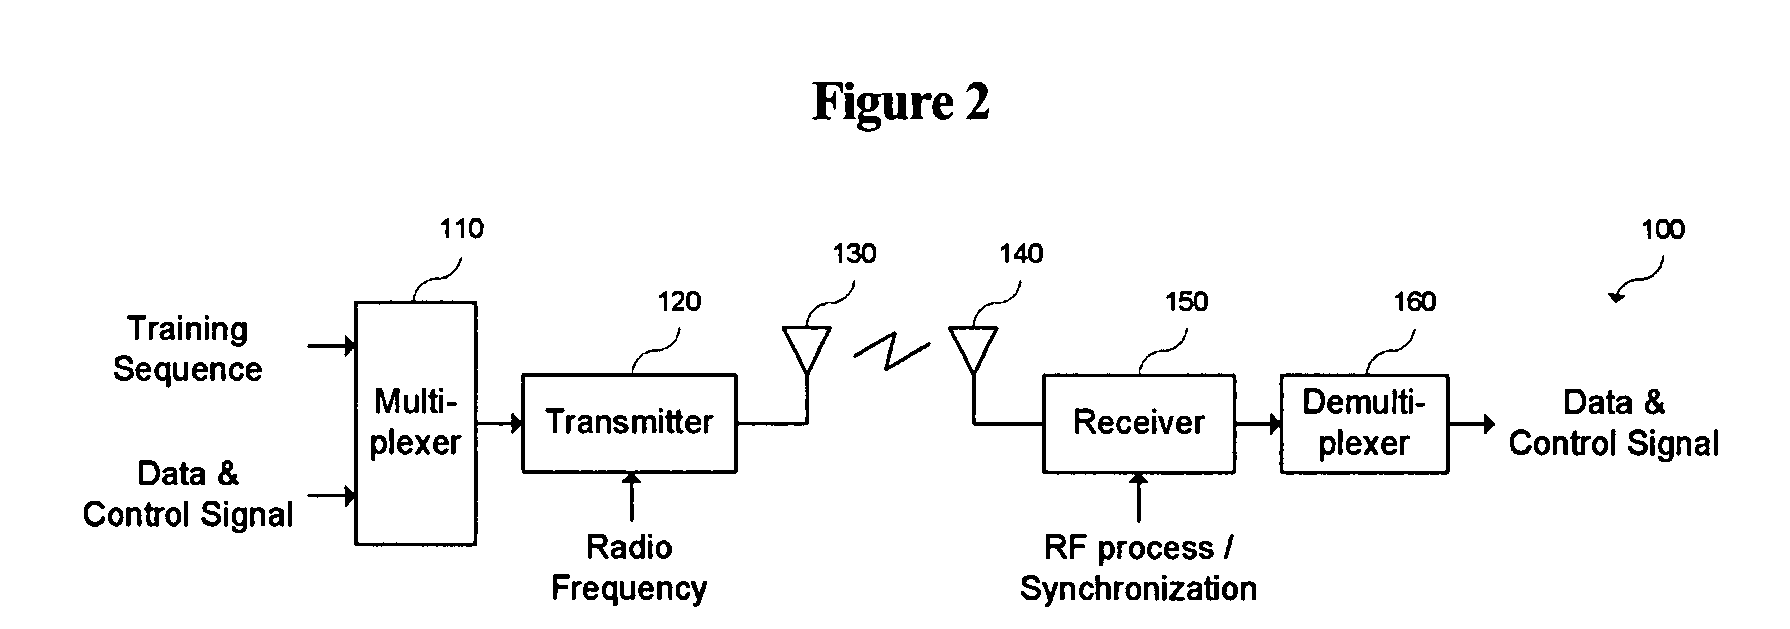 Training sequence for wireless communication system